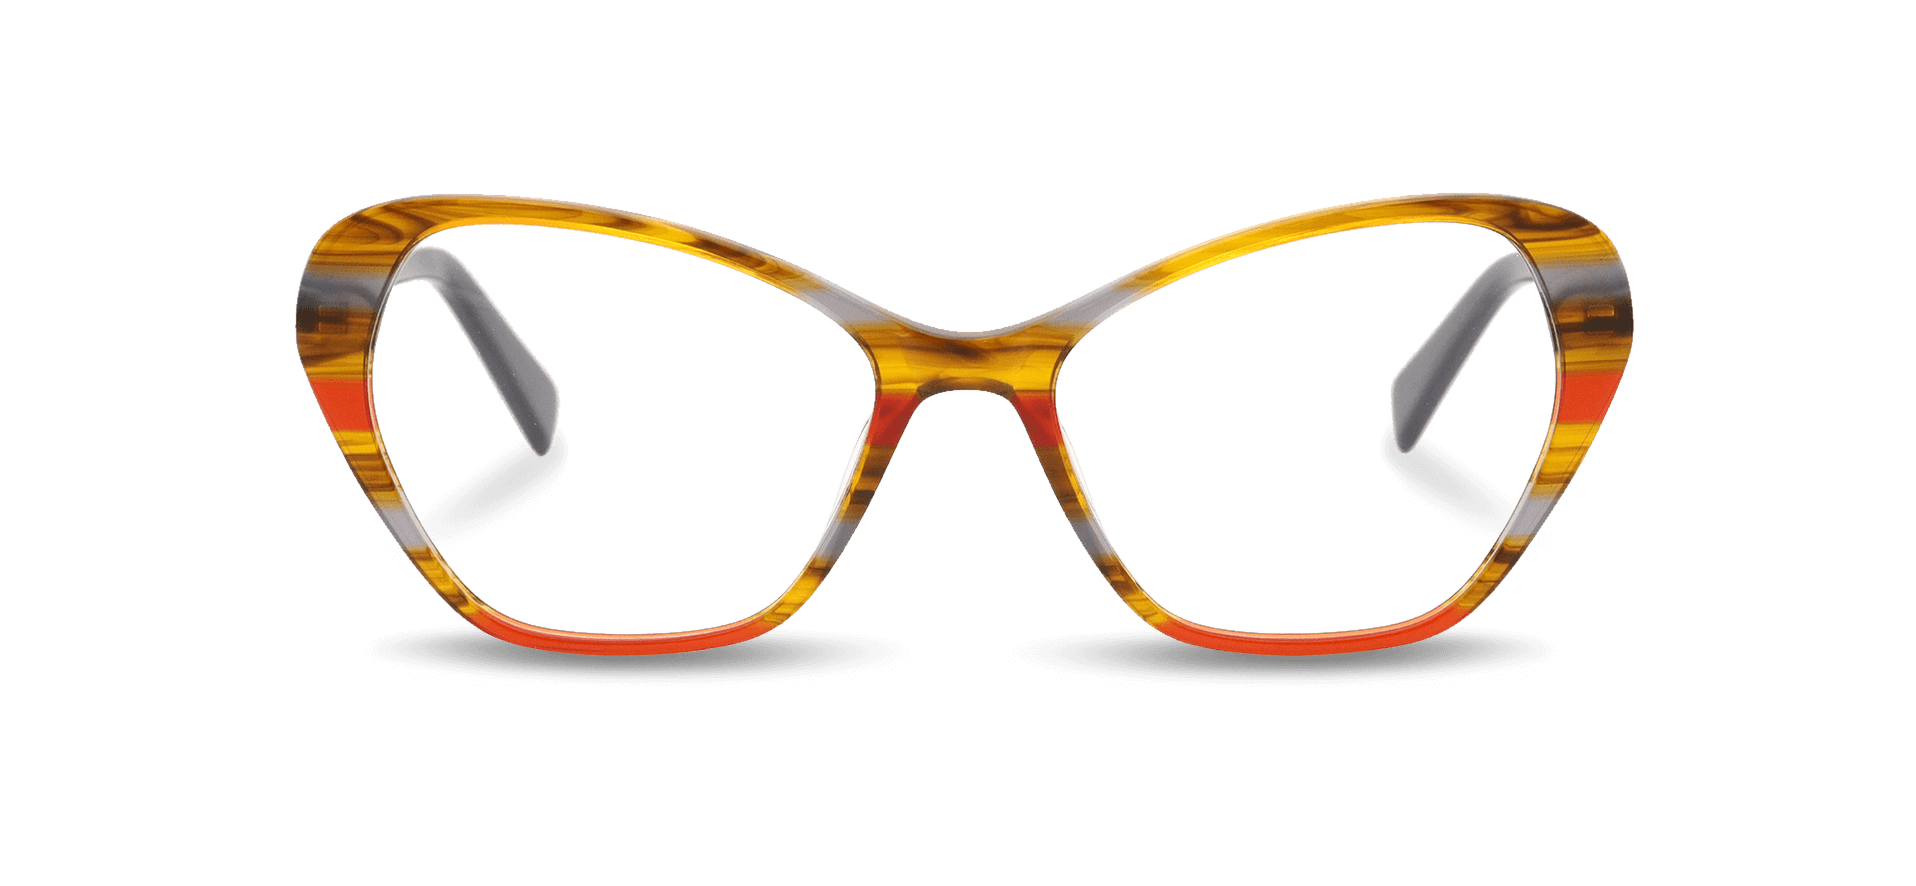 Colorful reading glasses